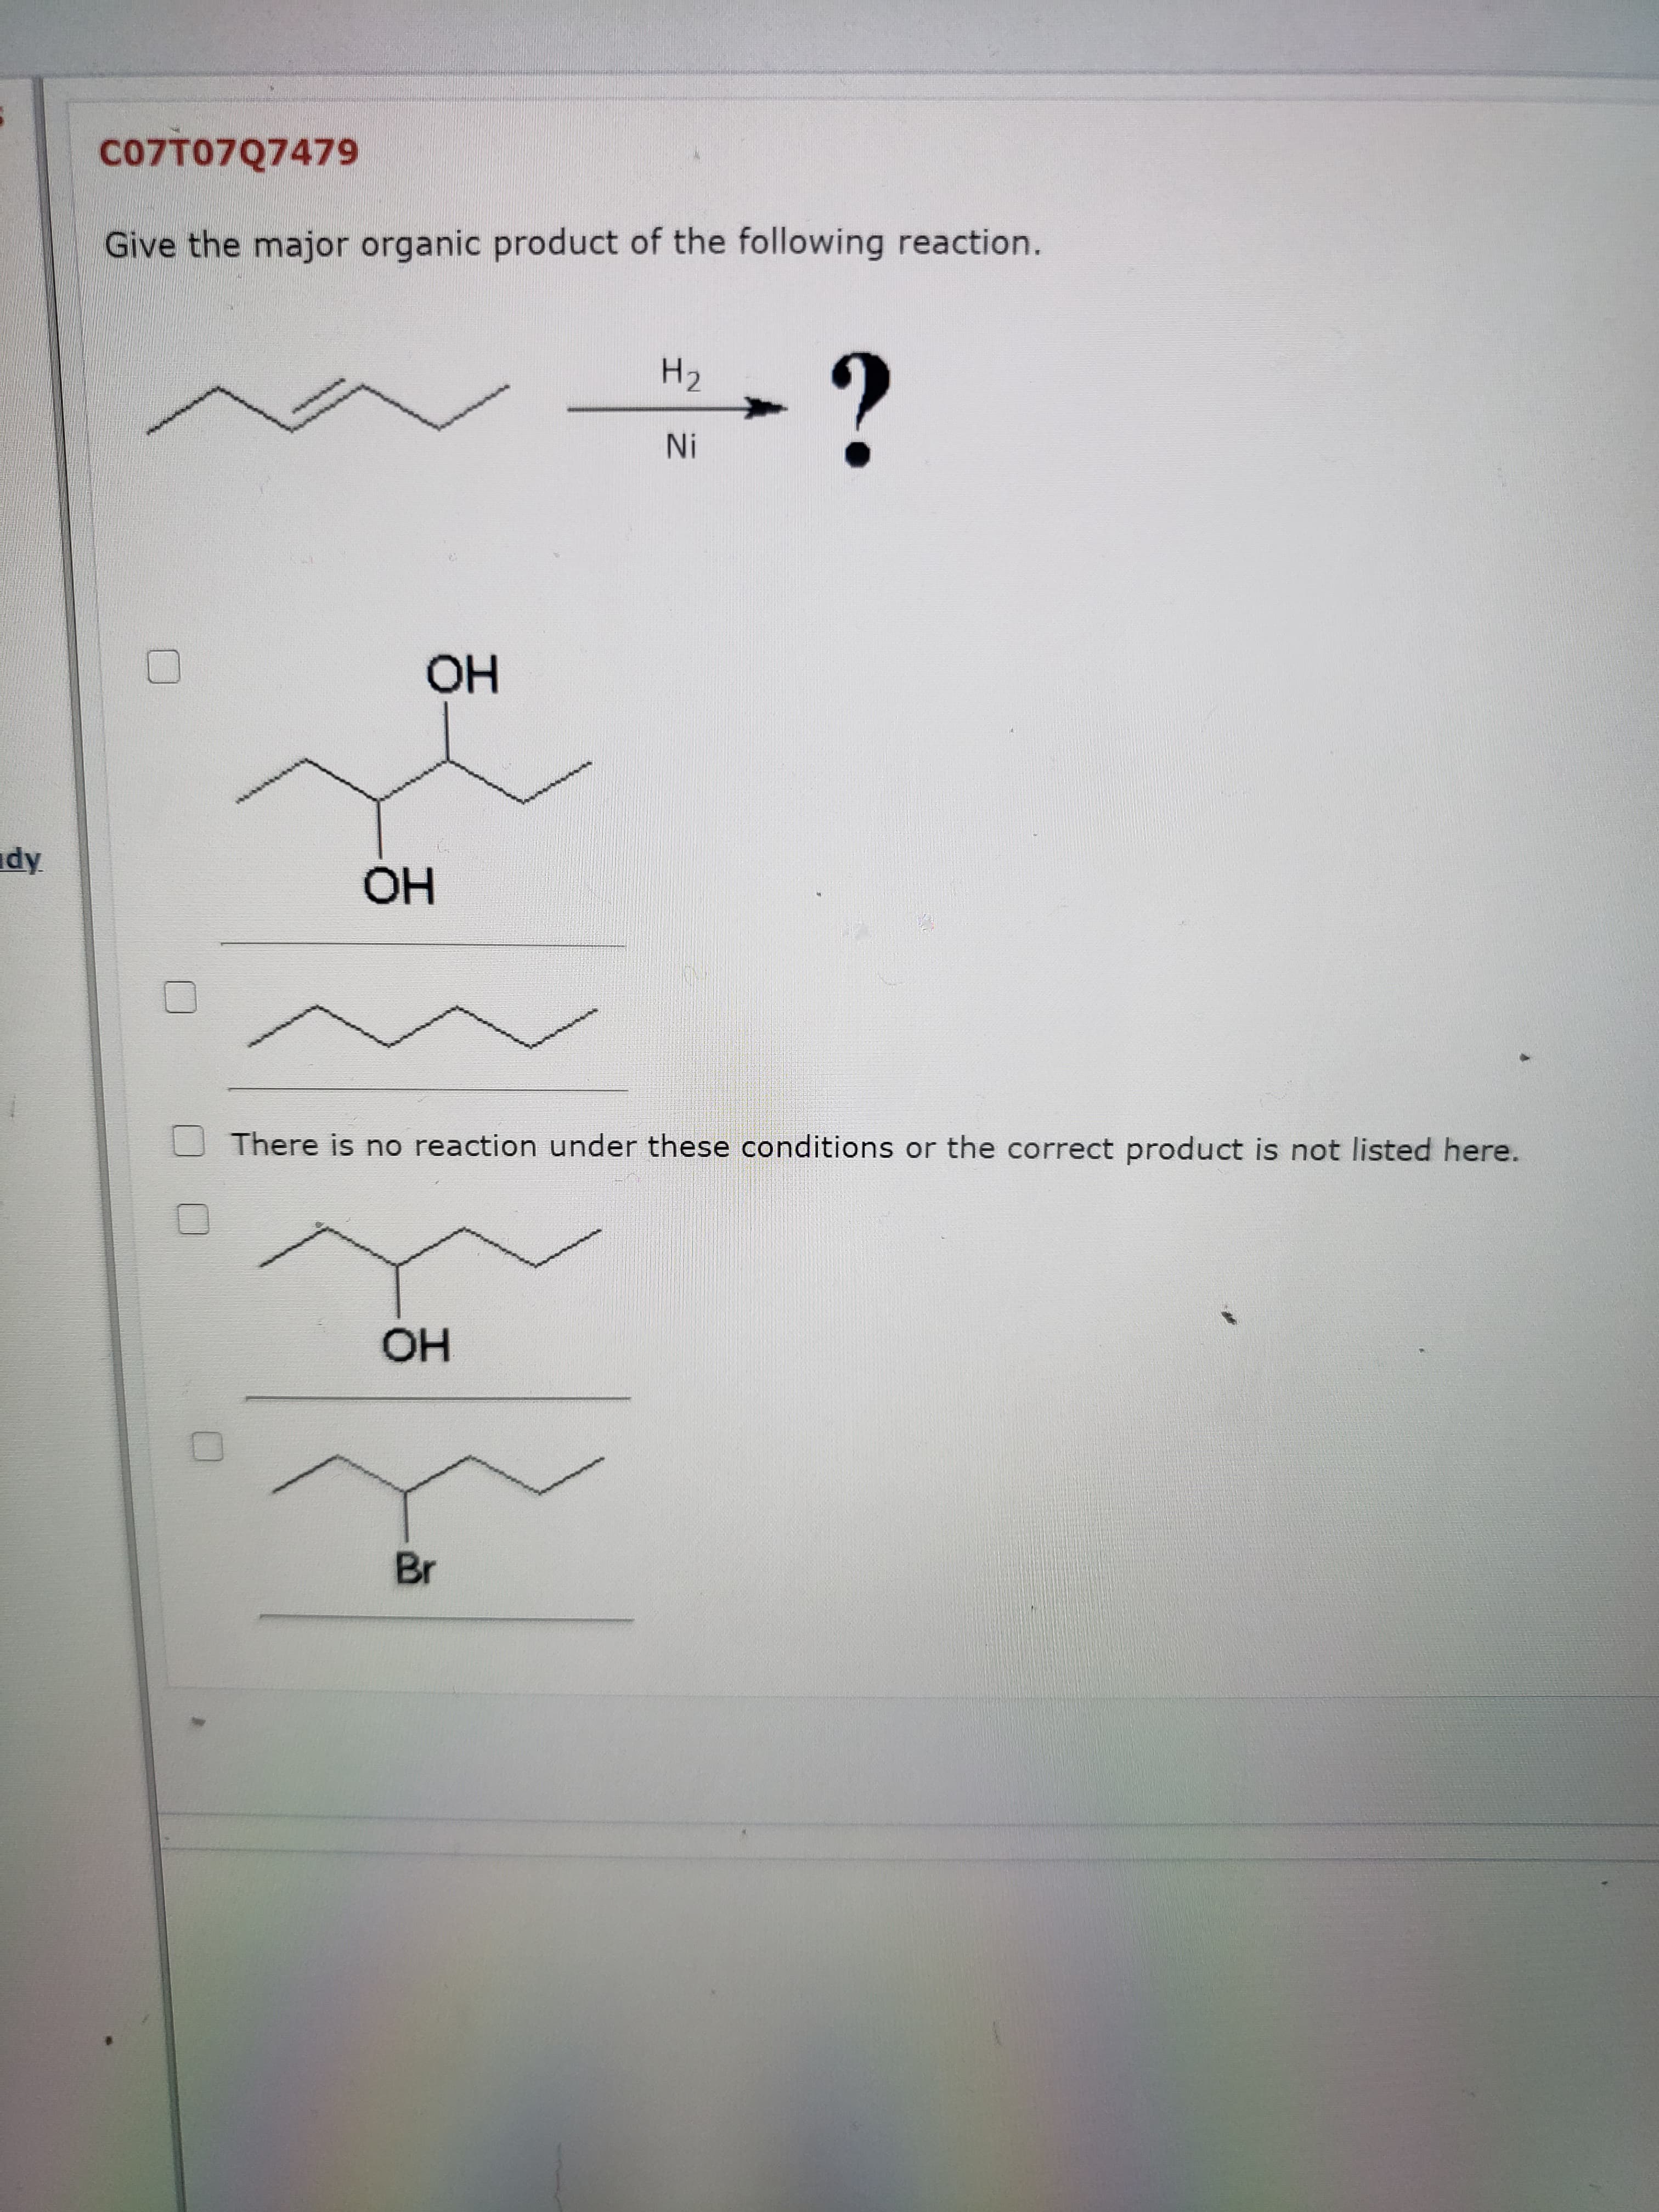 Give the major organic product of the following reaction.
H2
Ni
